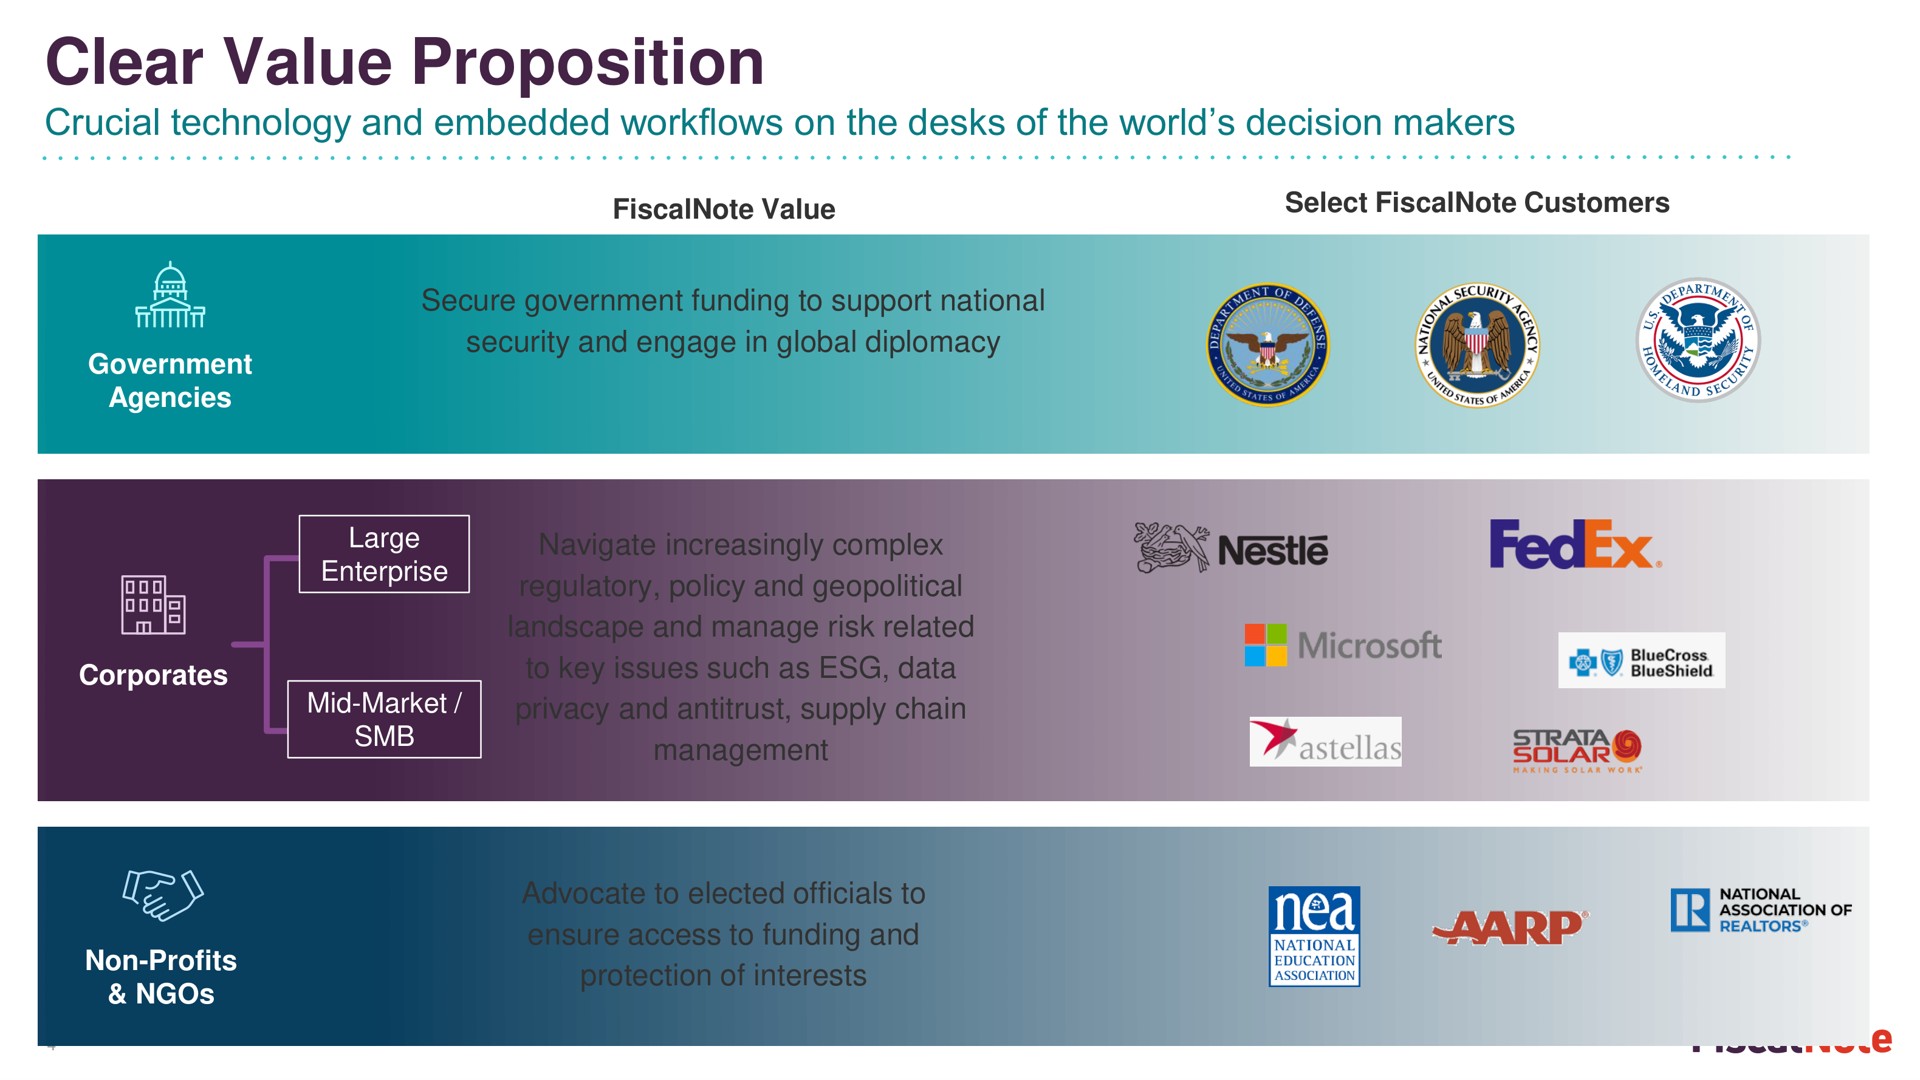 clear value proposition crucial technology and embedded on the desks of the world decision makers | FiscalNote